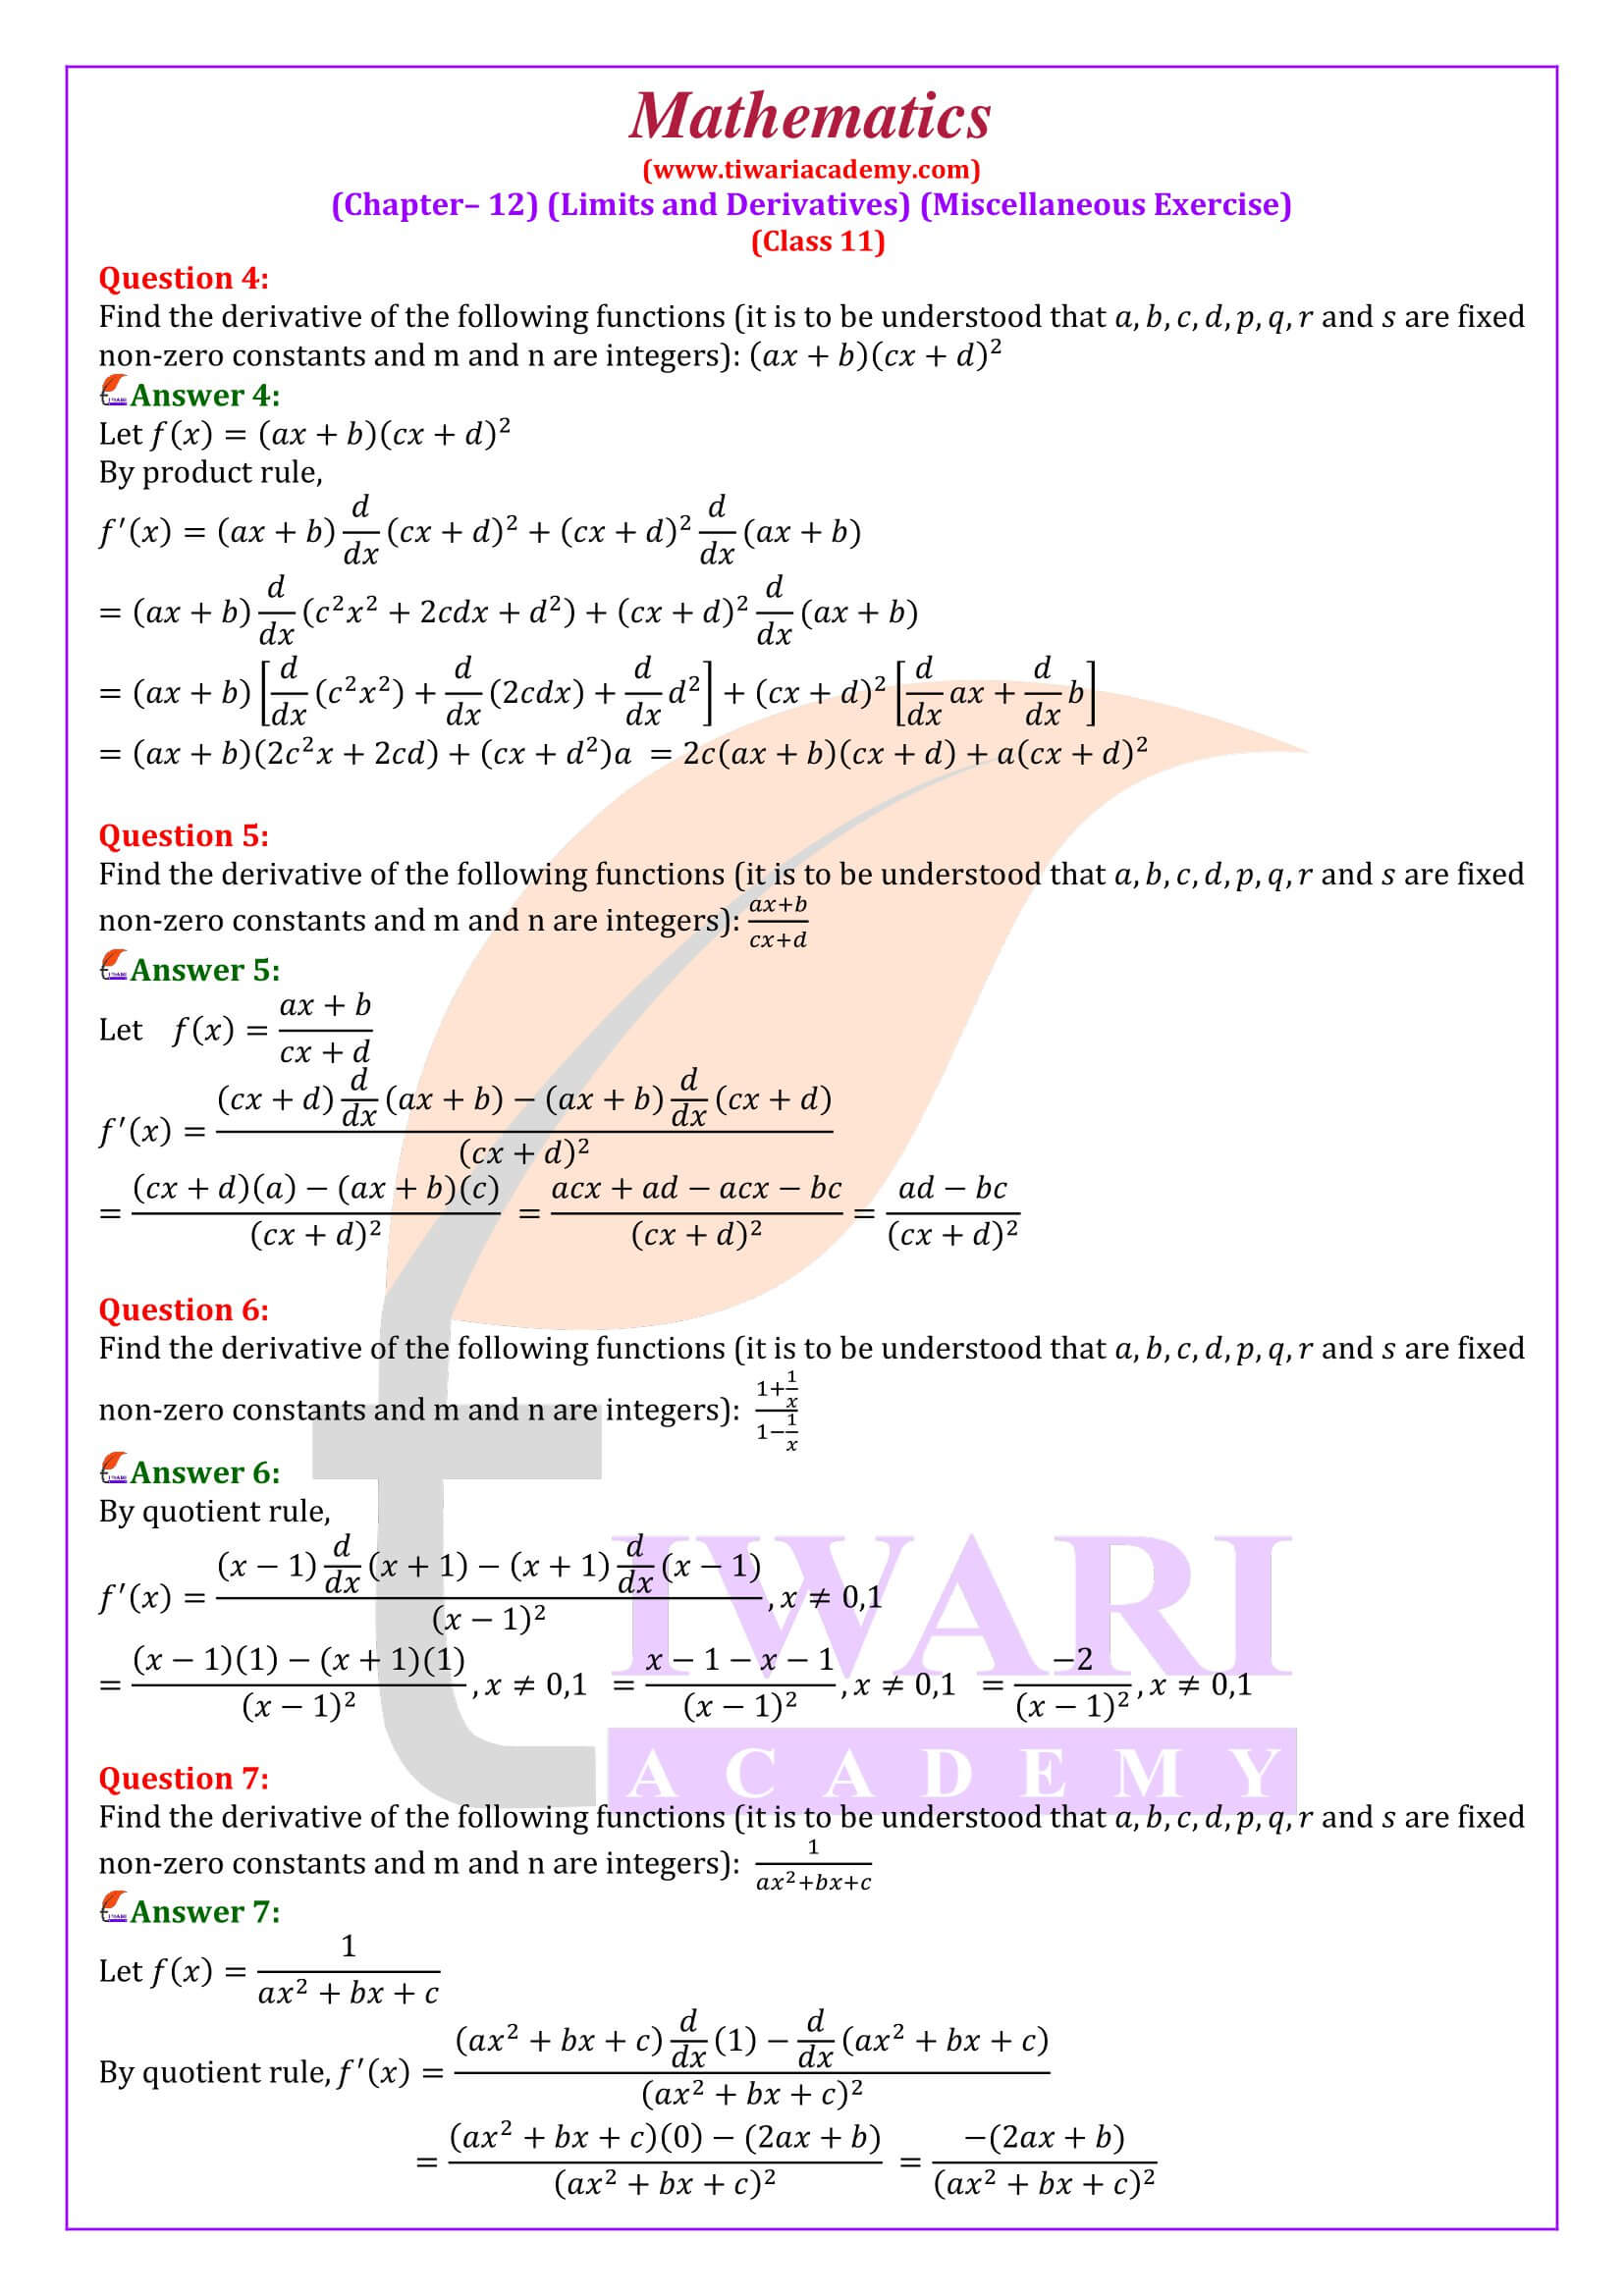 Class 11 Maths Chapter 12 Miscellaneous Exercise